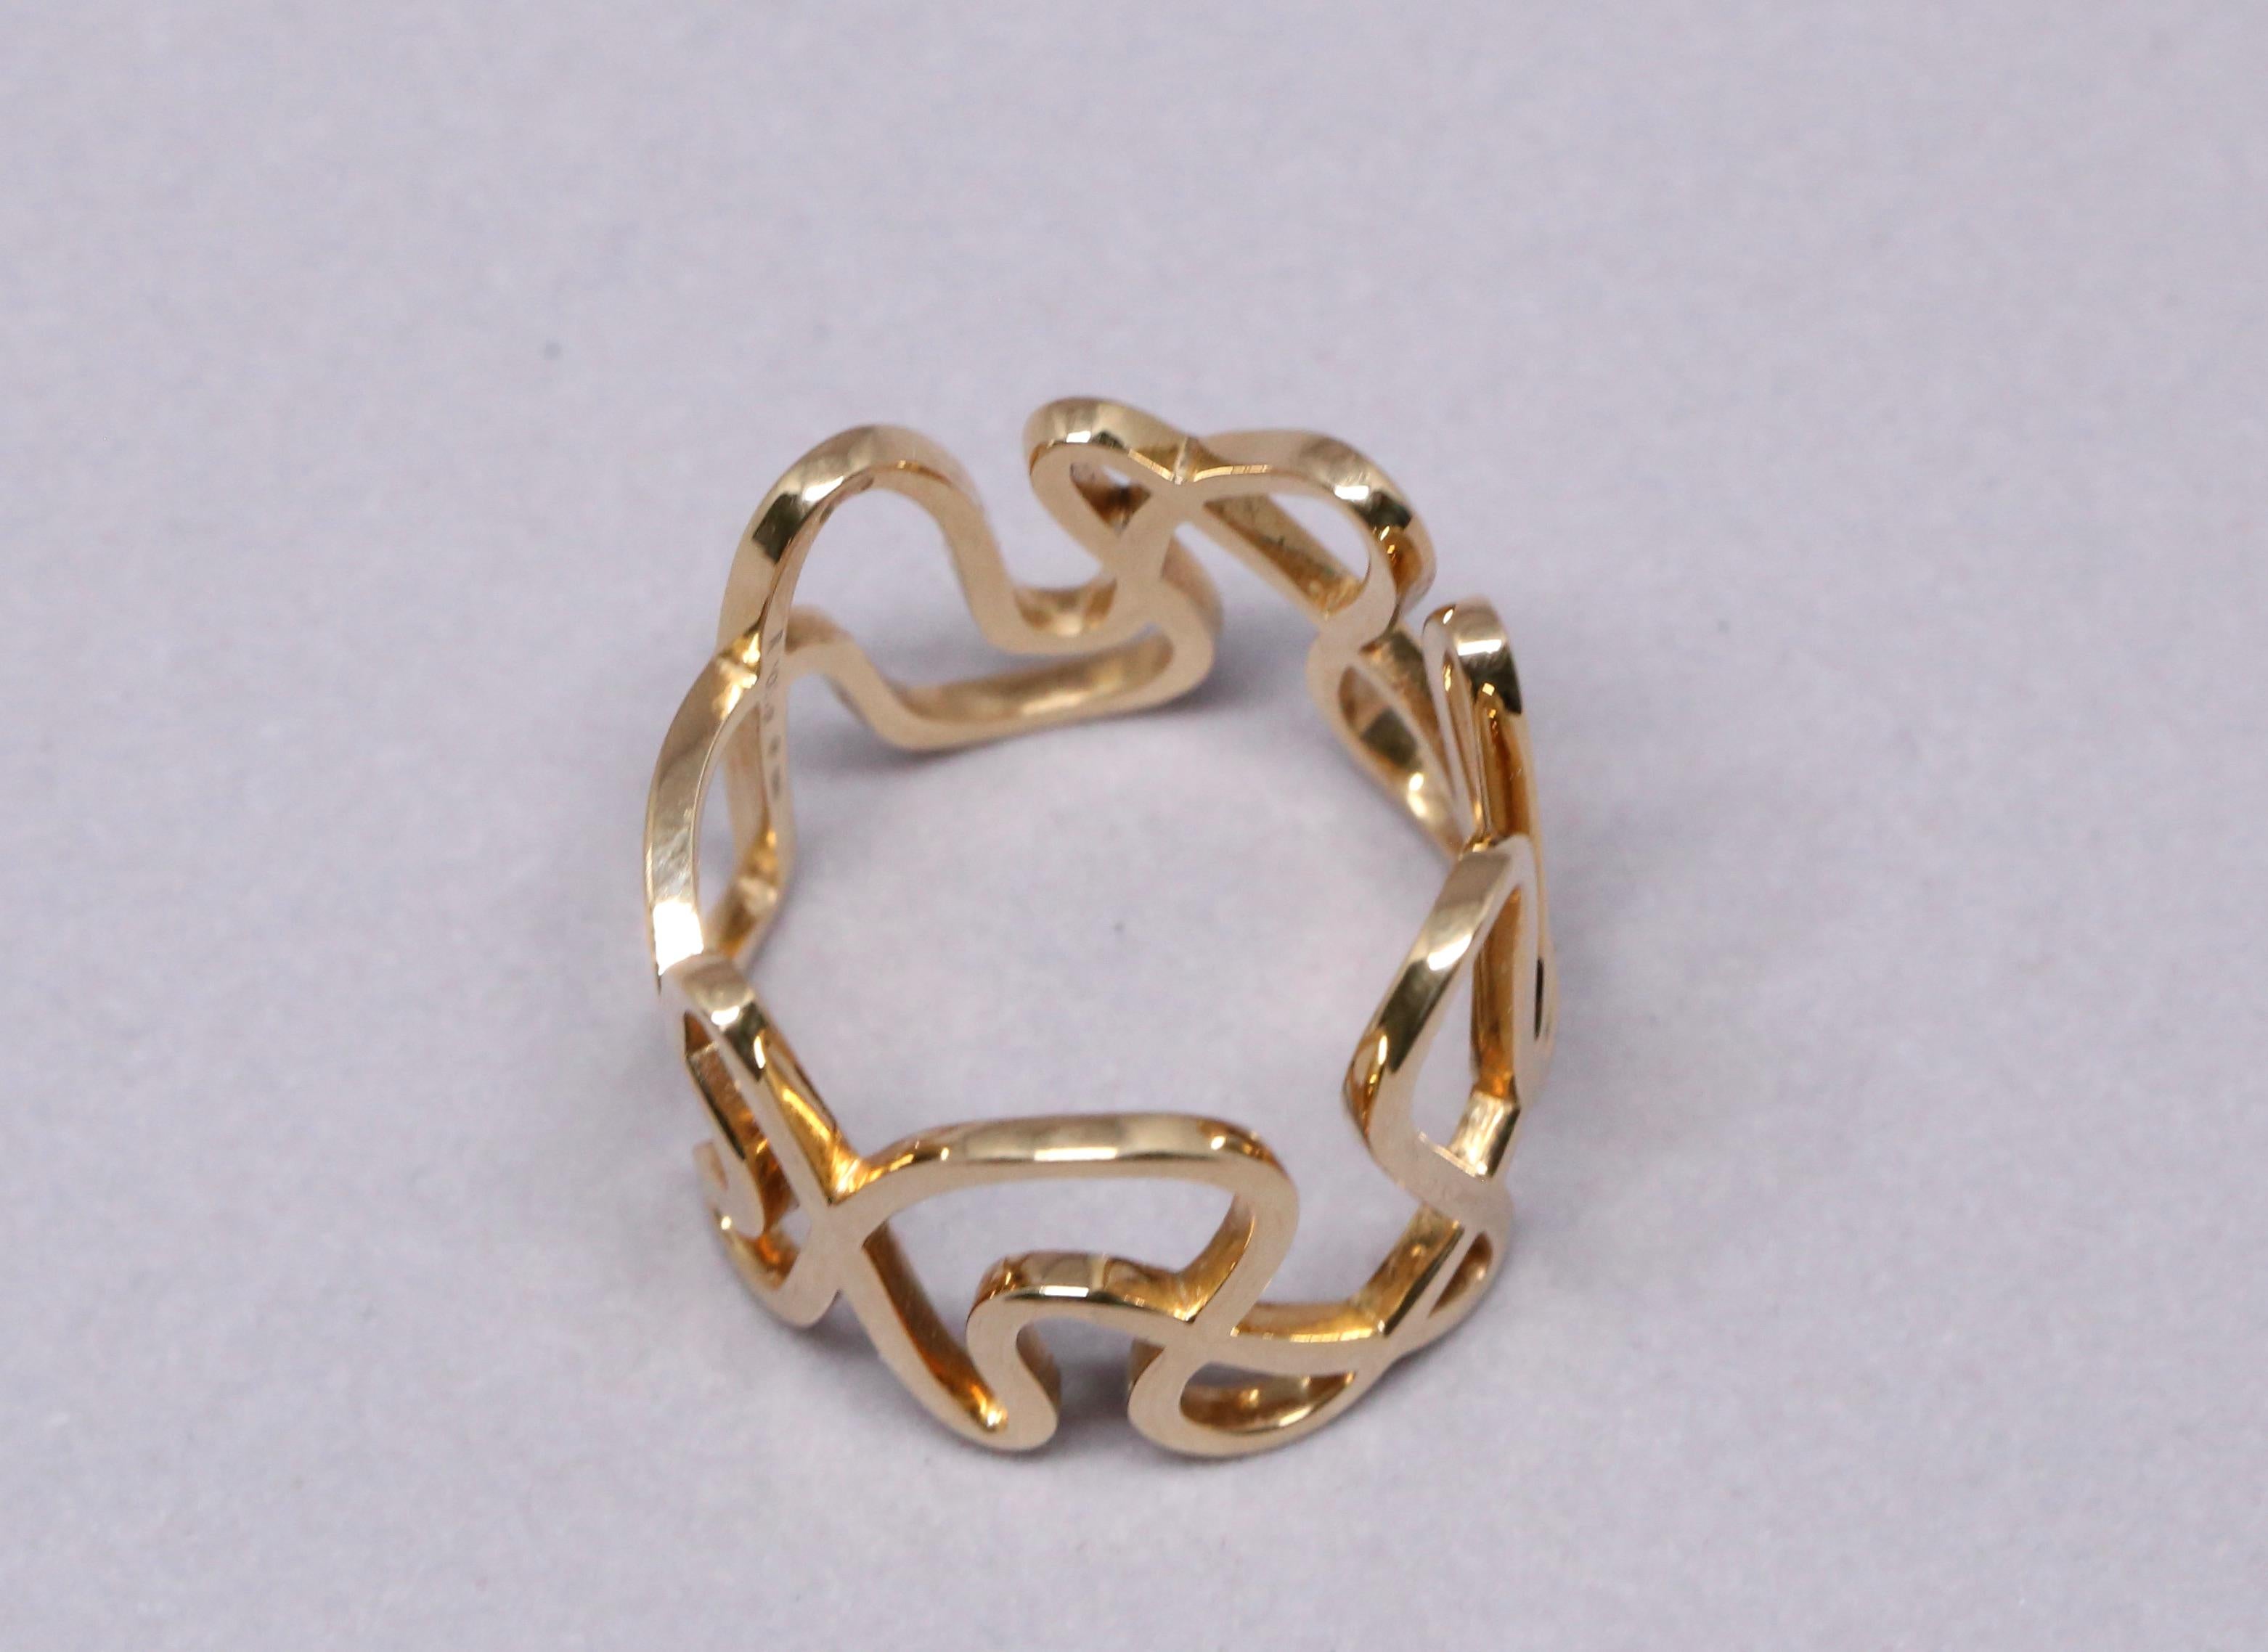 Very unusual, 18k gold 'white noise' ring by Repossi. Signed and numbered. Ring size is approximately a US 8 at the center of ring however this will fit a size 7 due to the extra very wide band. Band width is approximately 16mm. Made in France.